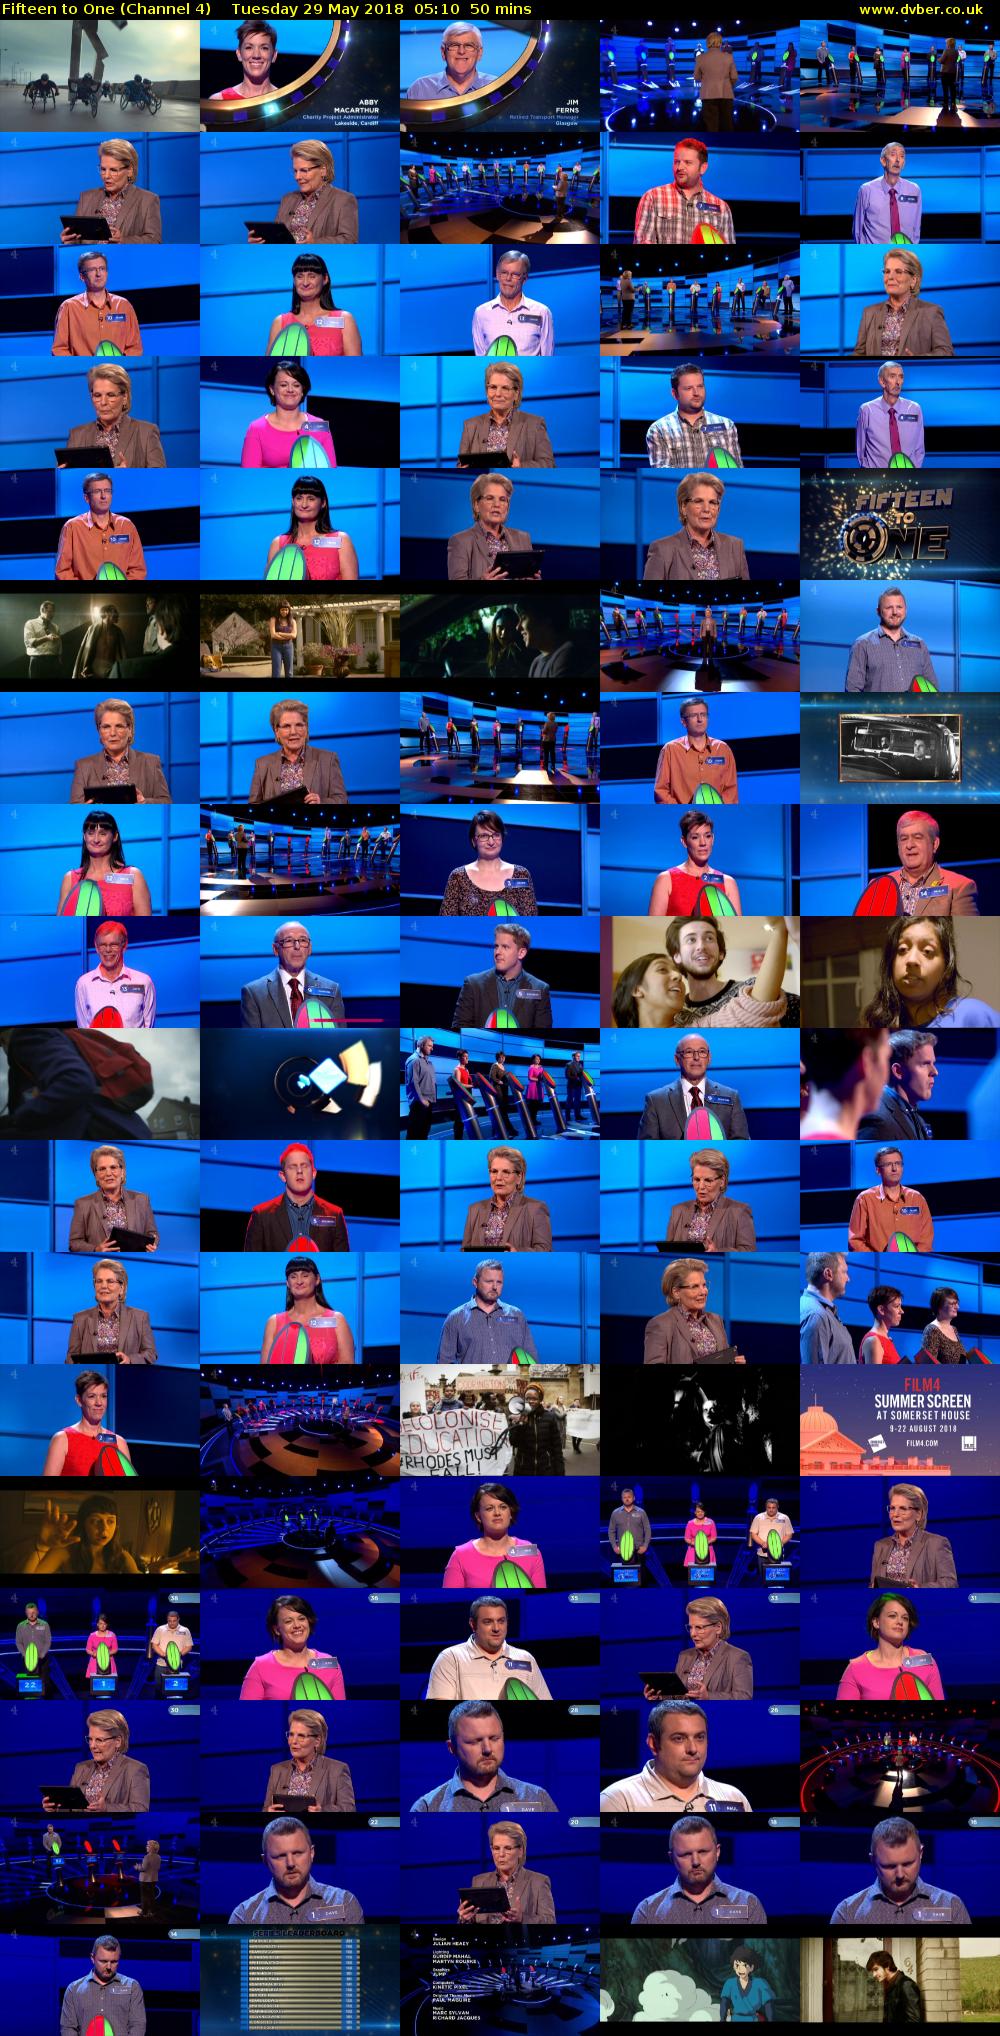 Fifteen to One (Channel 4) Tuesday 29 May 2018 05:10 - 06:00